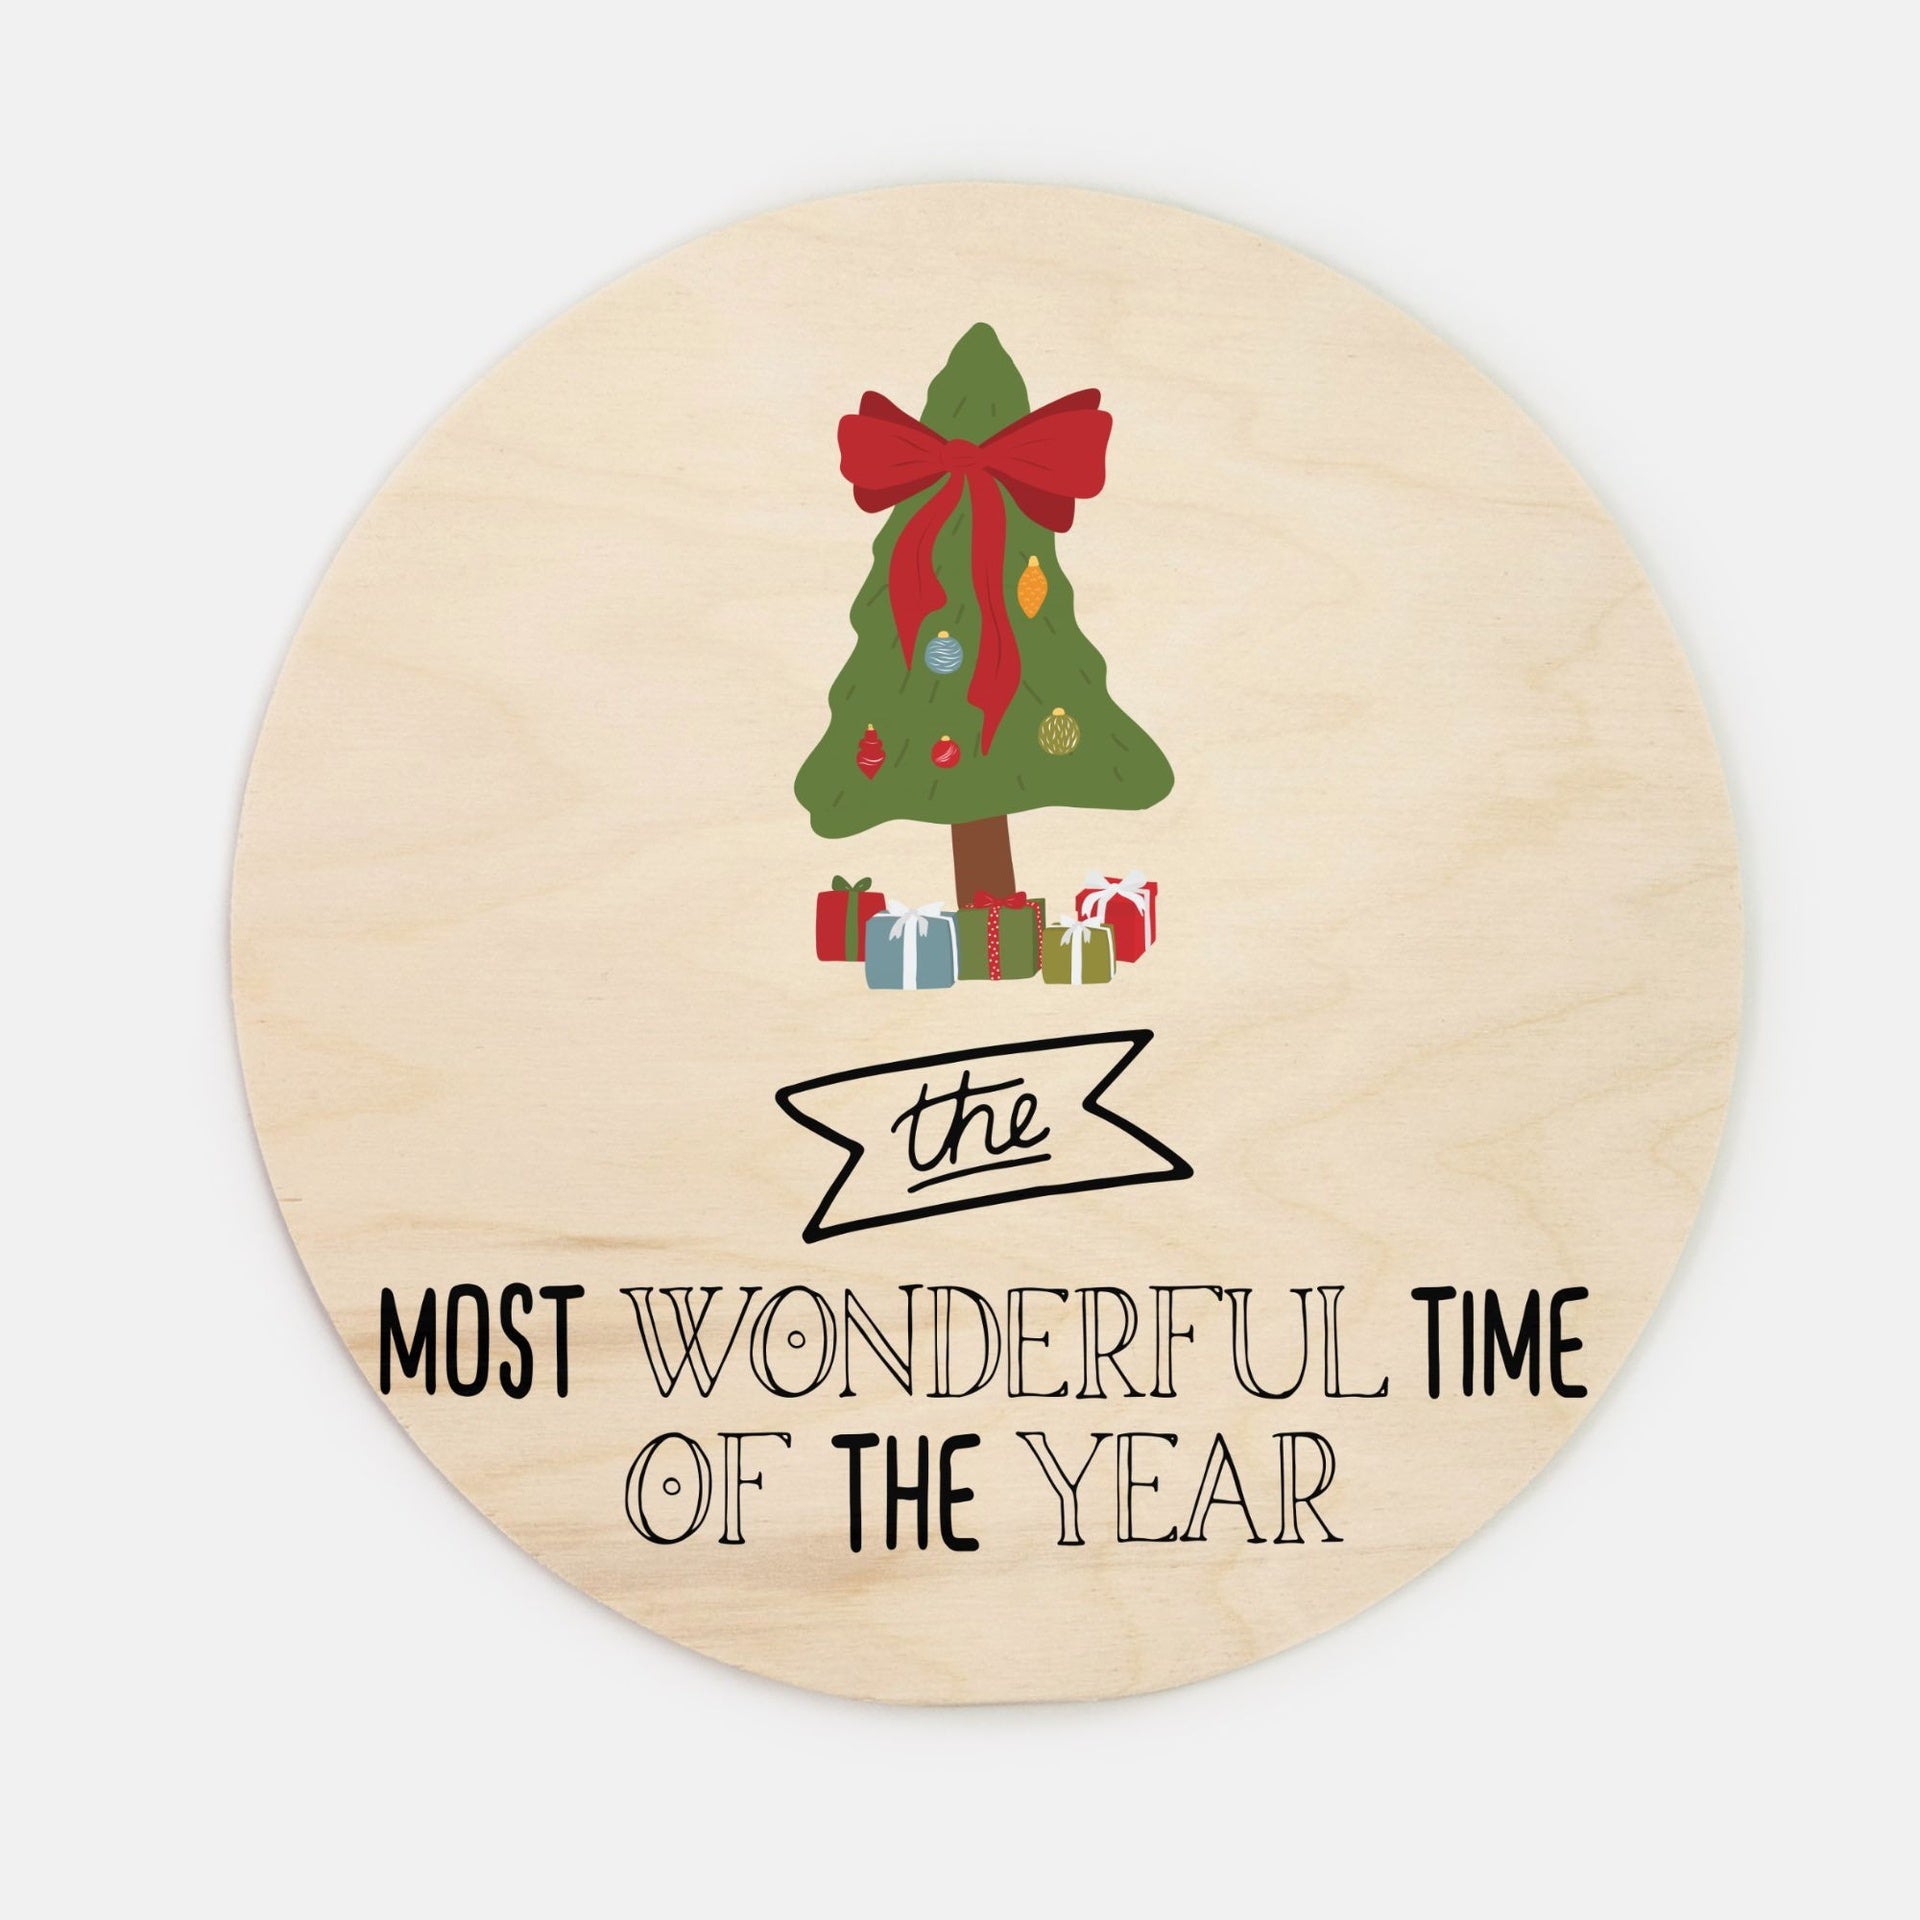 10" Round Wood Sign - Most Wonderful Time